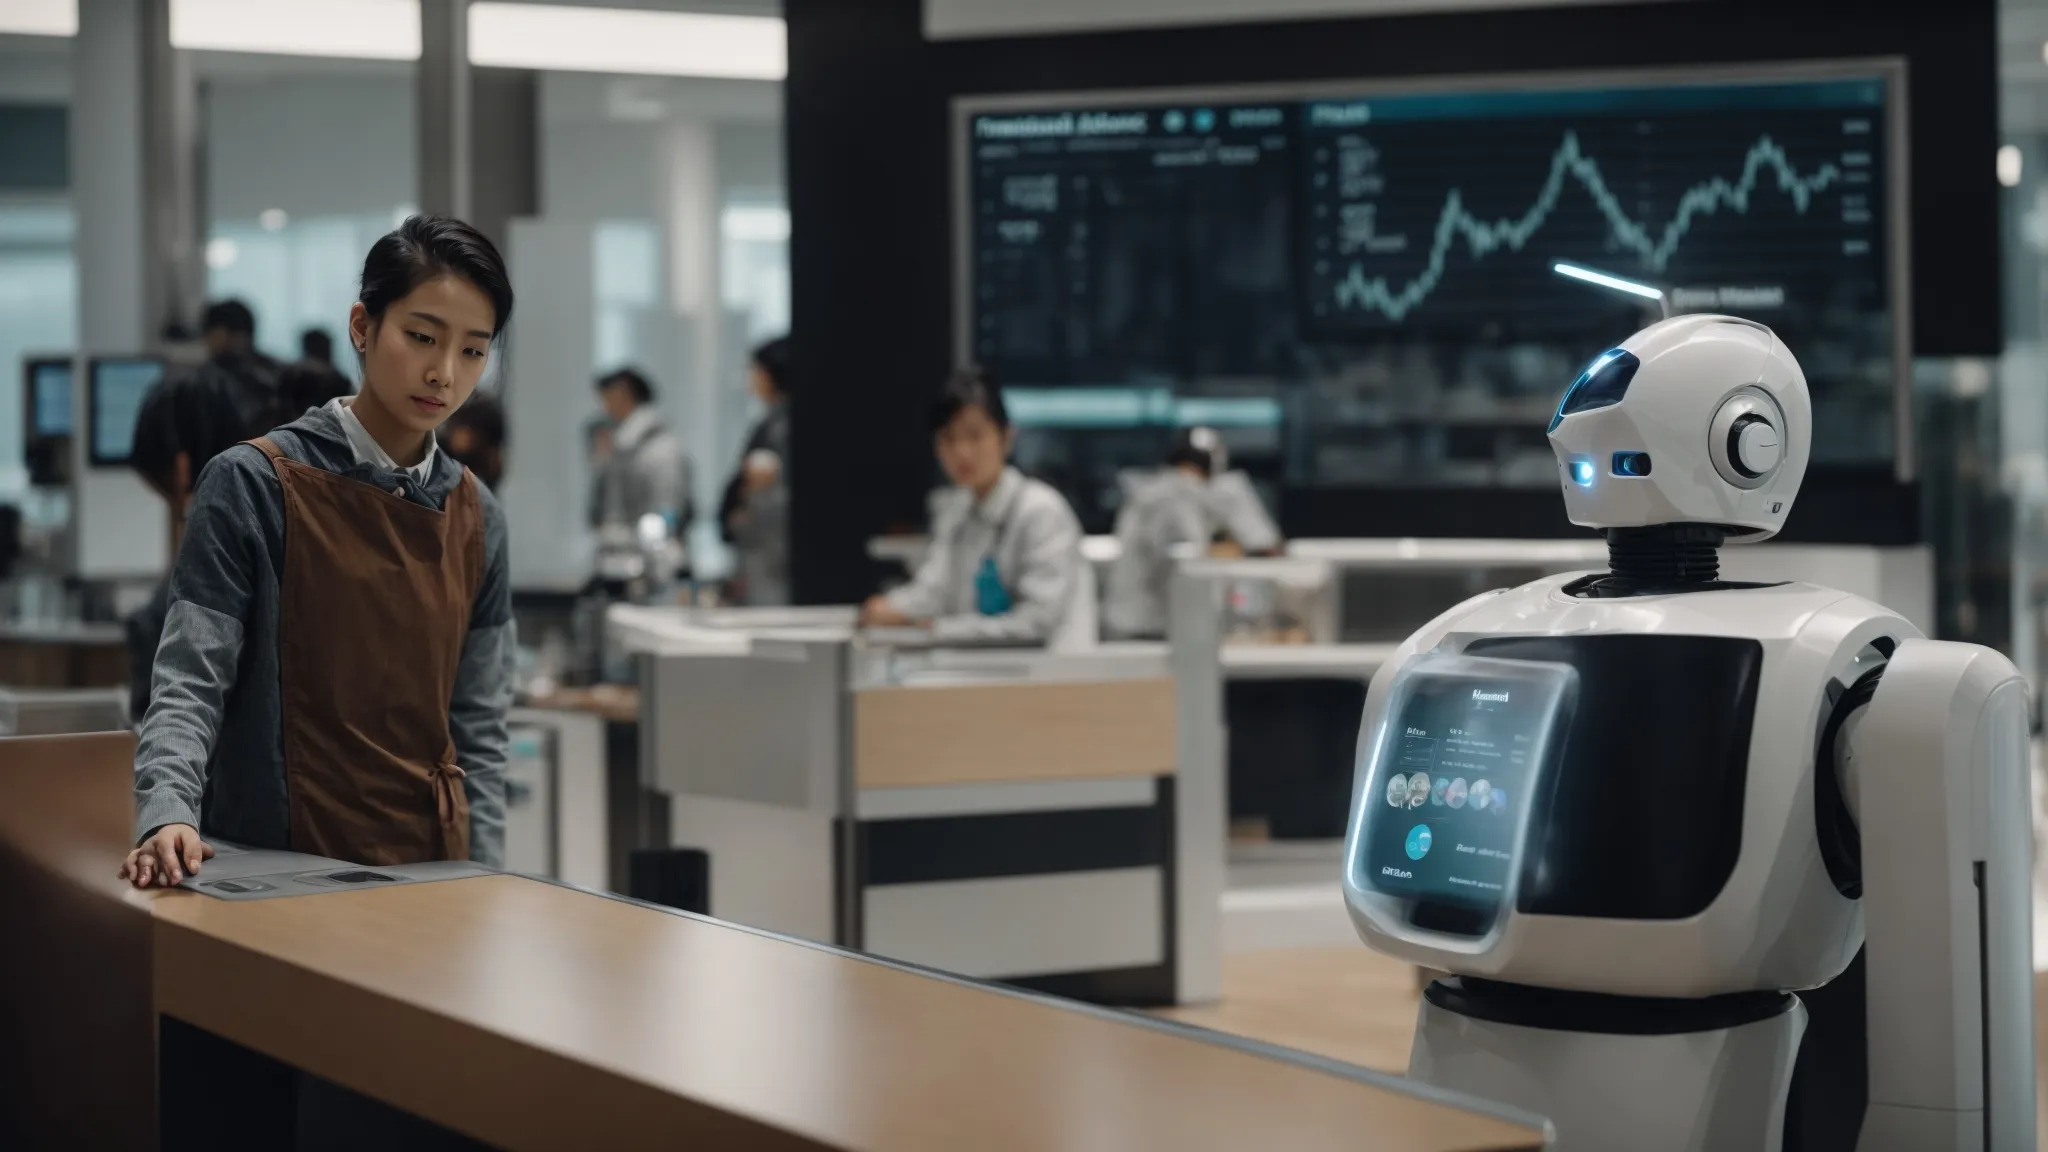 a humanoid robot interacts with a touch screen displaying customer service analytics.